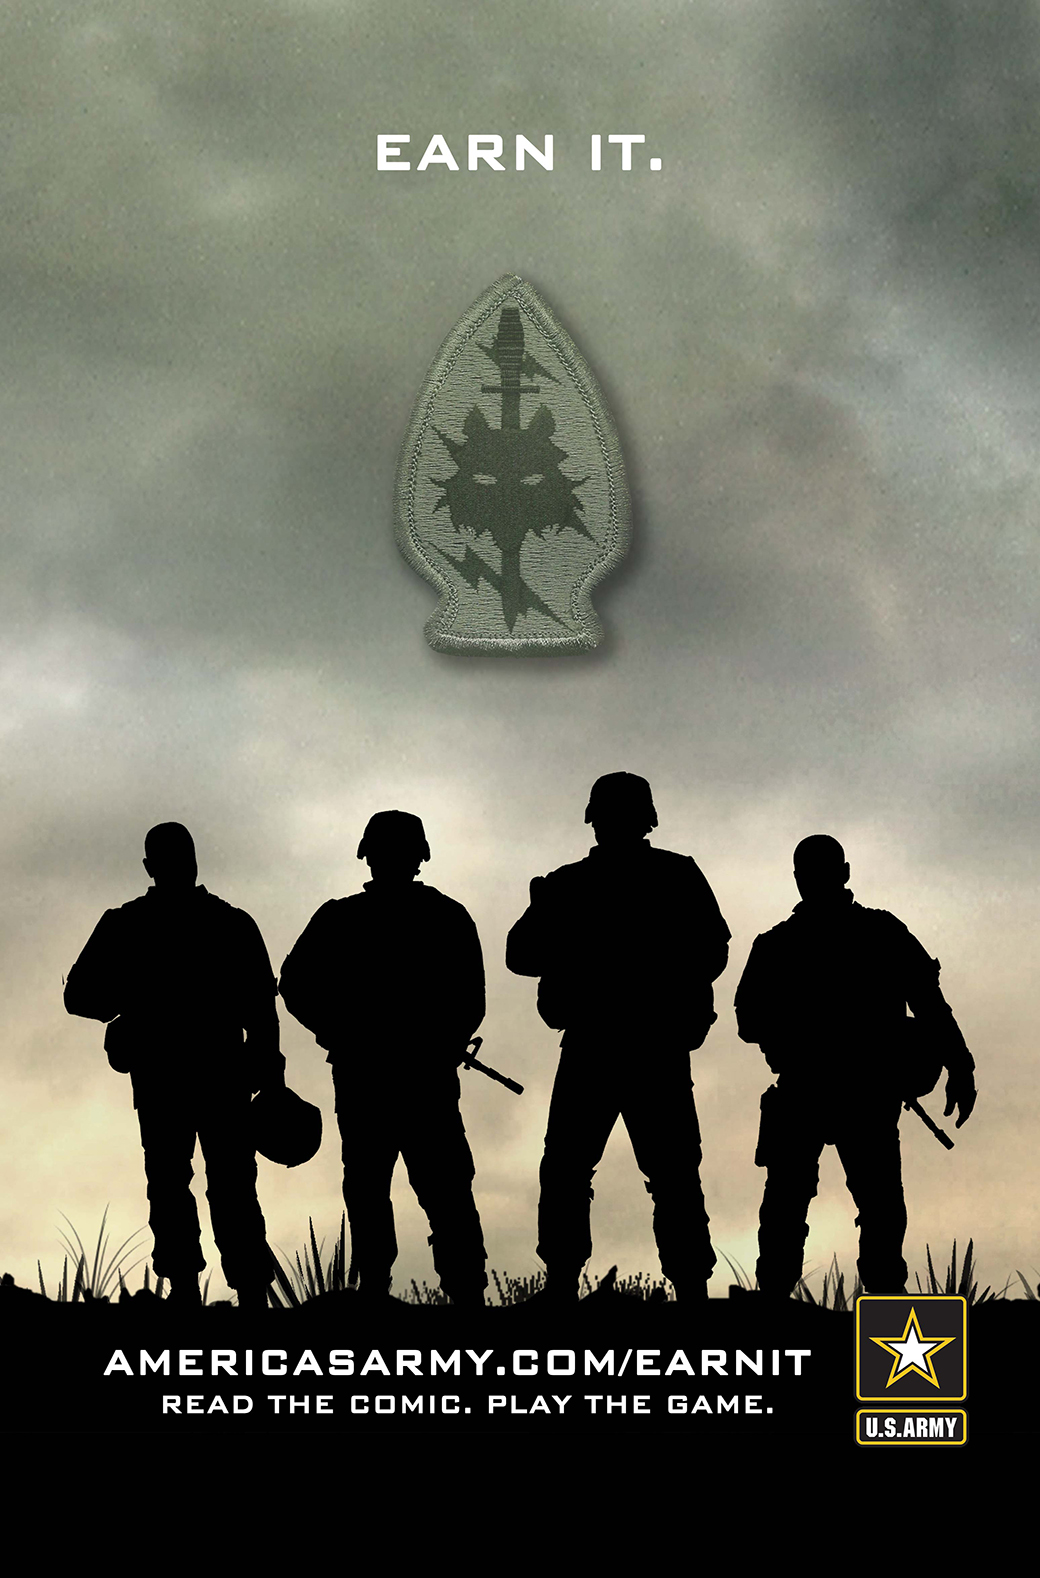 access army records online army knowledge online